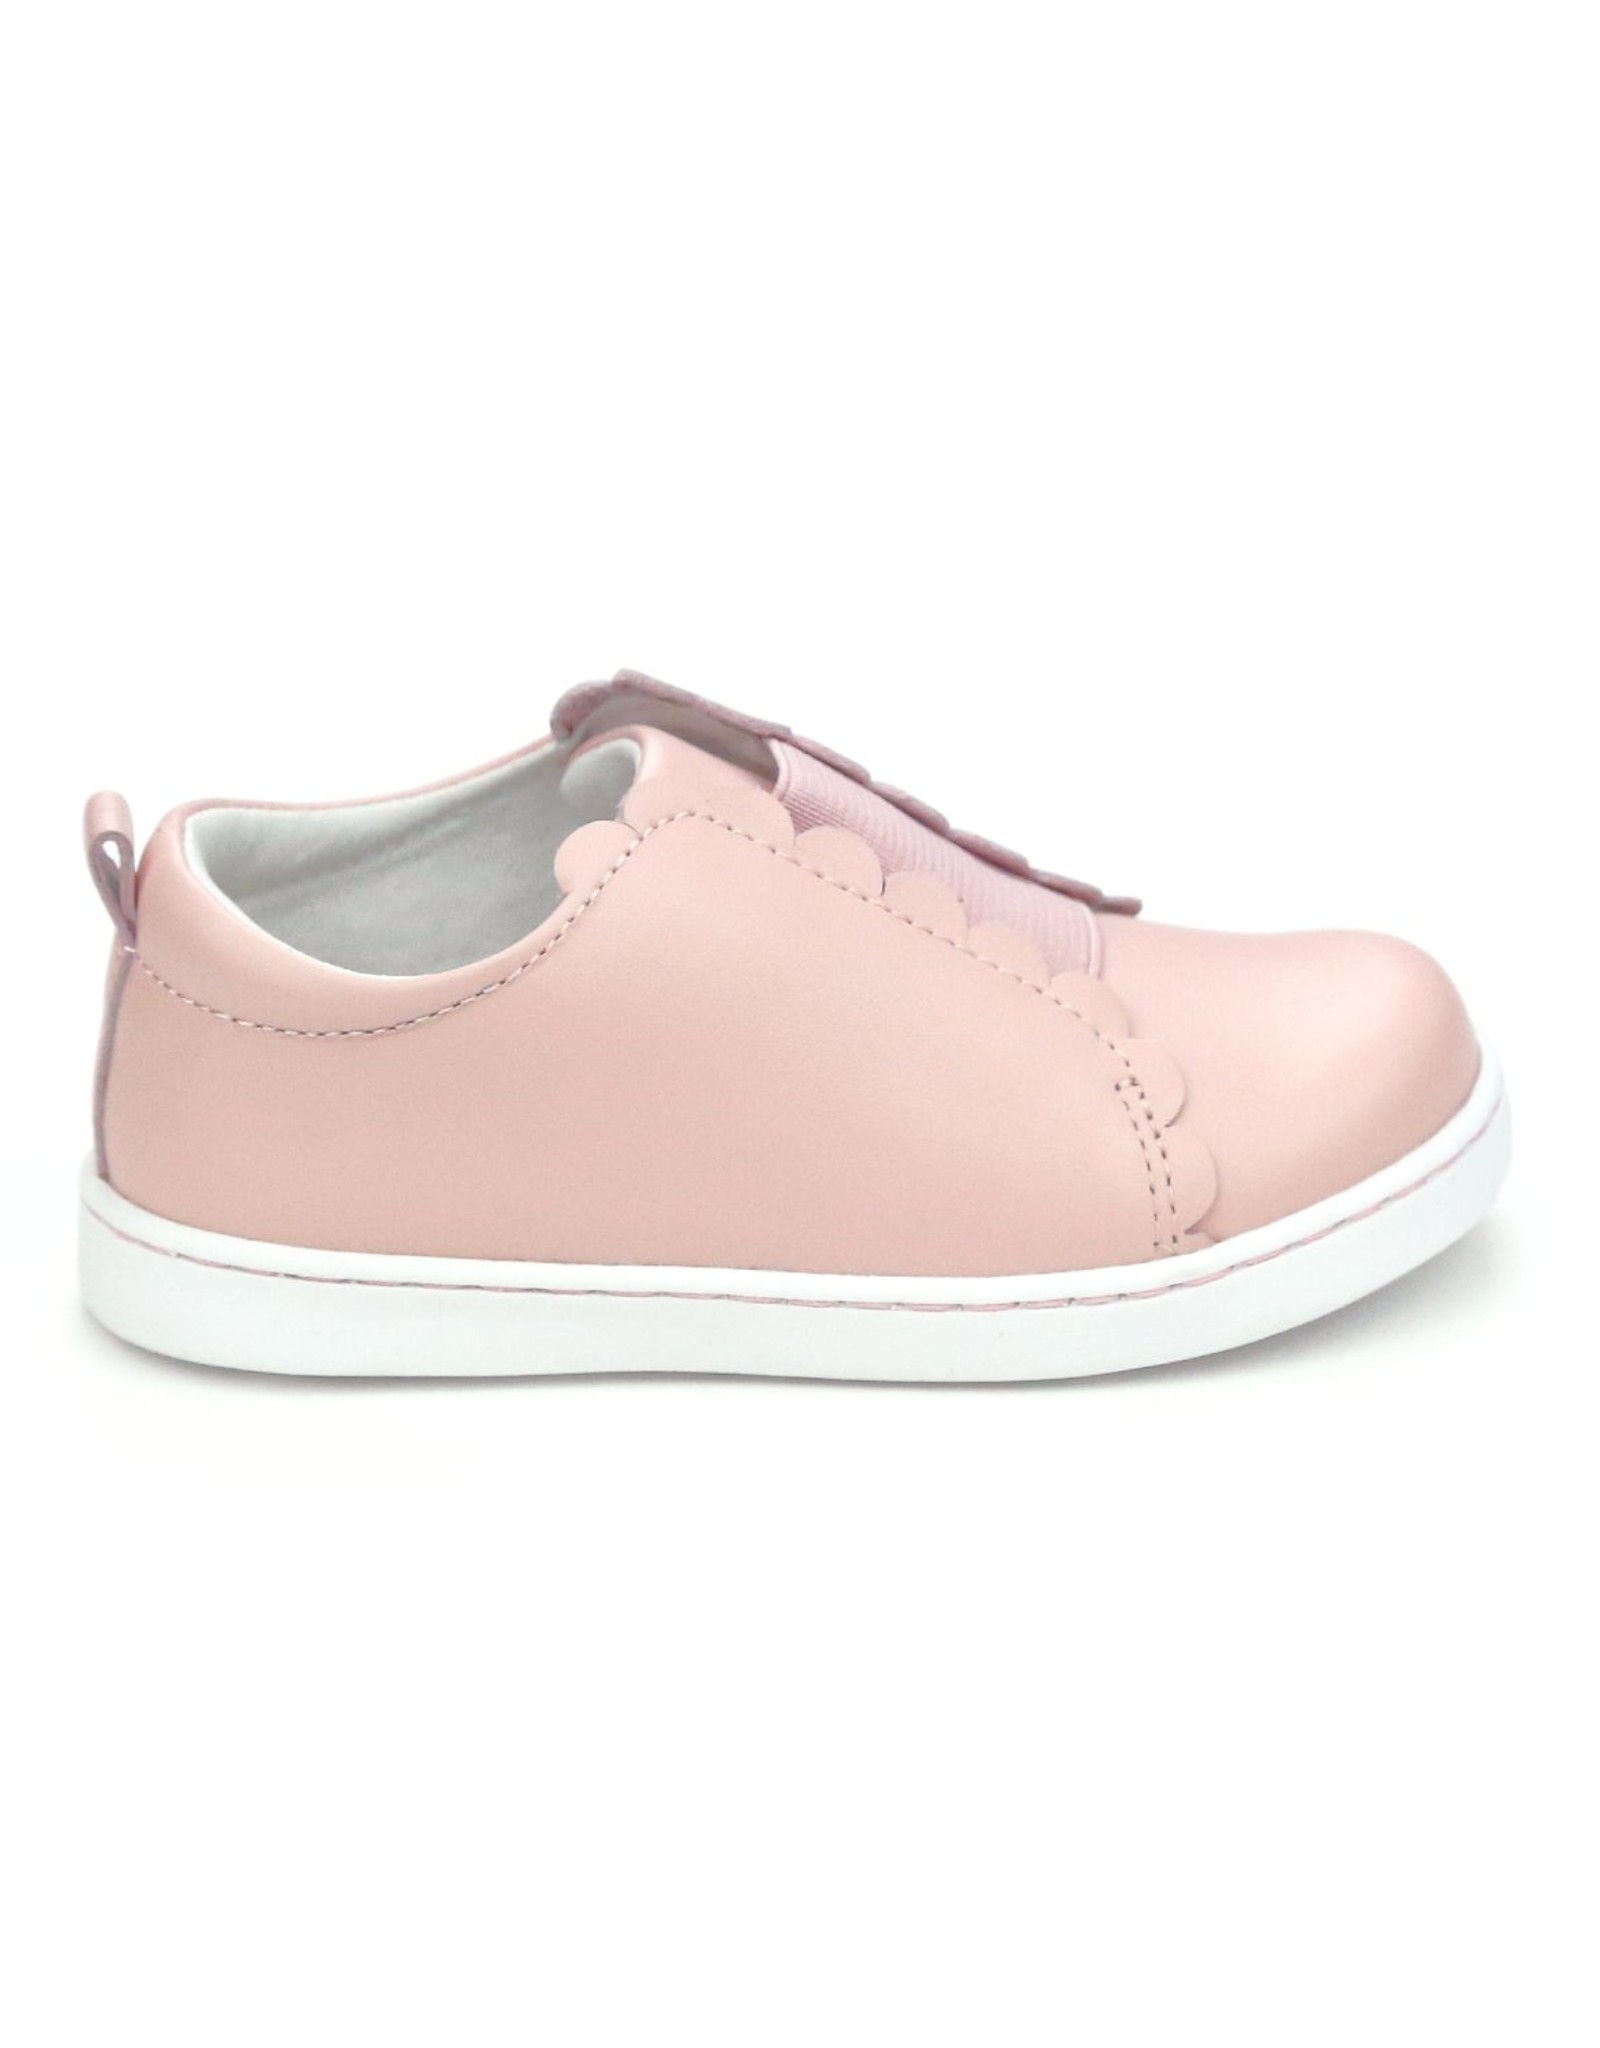 L'Amour 682 Phoebe Sneaker Pink